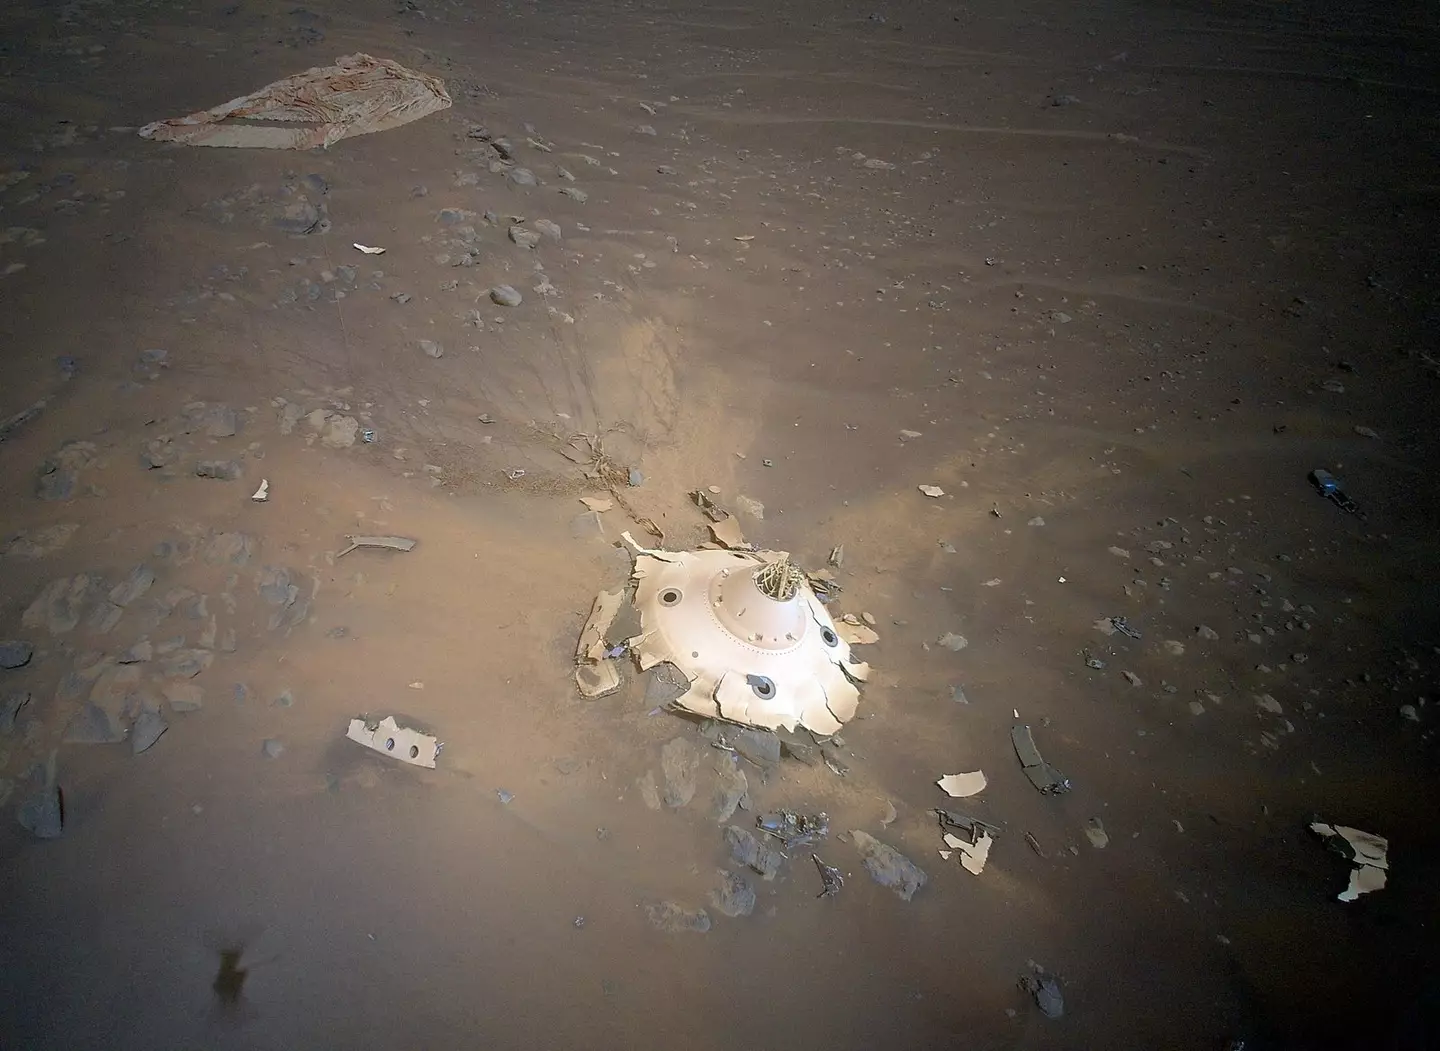 NASA’s Mars helicopter Ingenuity finds 'otherworldly' wreckage on ...